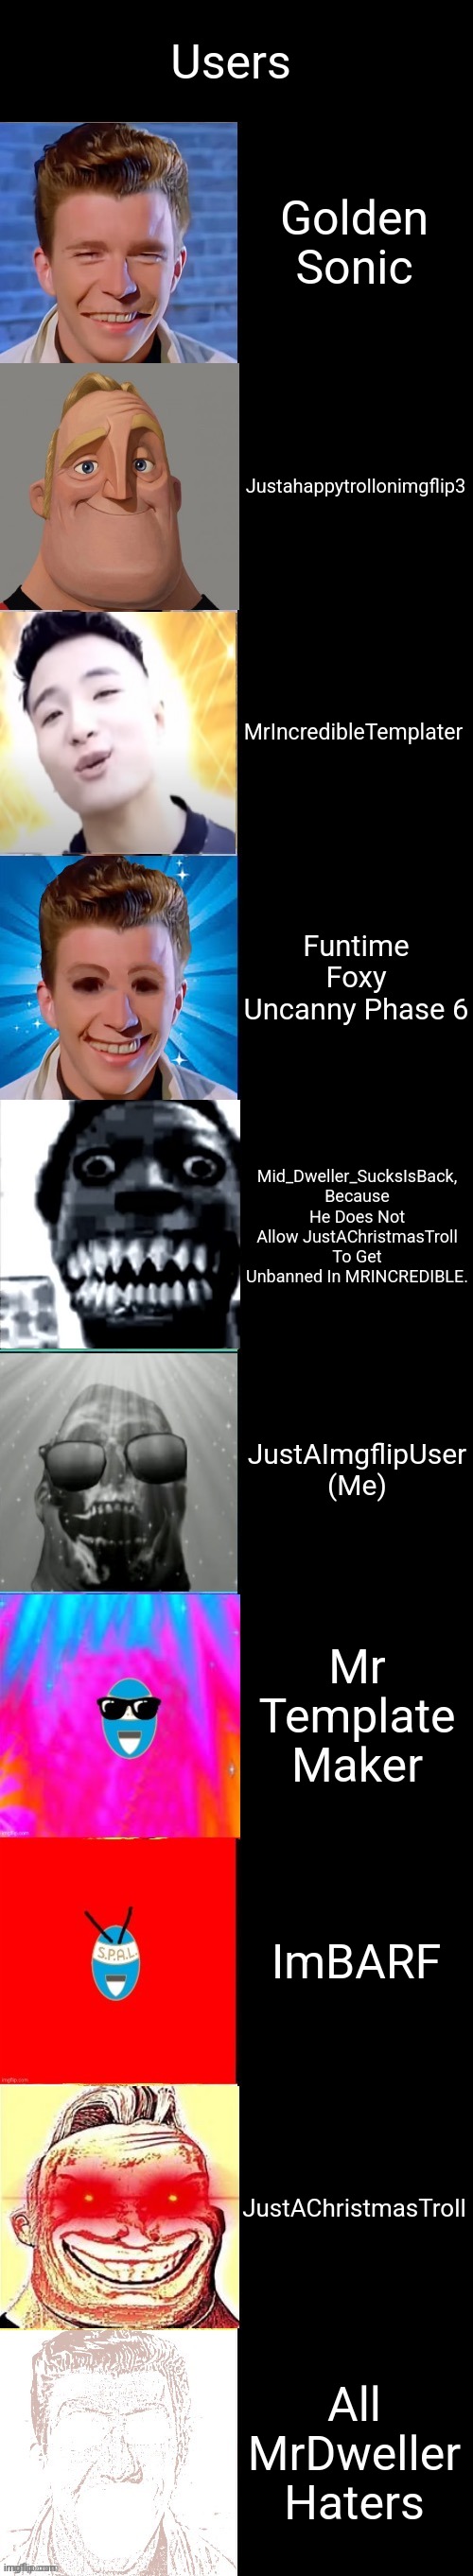 Uncanniest: Phase 22 | Users; Golden Sonic; Justahappytrollonimgflip3; MrIncredibleTemplater; Funtime Foxy Uncanny Phase 6; Mid_Dweller_SucksIsBack, Because He Does Not Allow JustAChristmasTroll To Get Unbanned In MRINCREDIBLE. JustAImgflipUser (Me); Mr Template Maker; ImBARF; JustAChristmasTroll; All MrDweller Haters | image tagged in anyone becoming canny | made w/ Imgflip meme maker